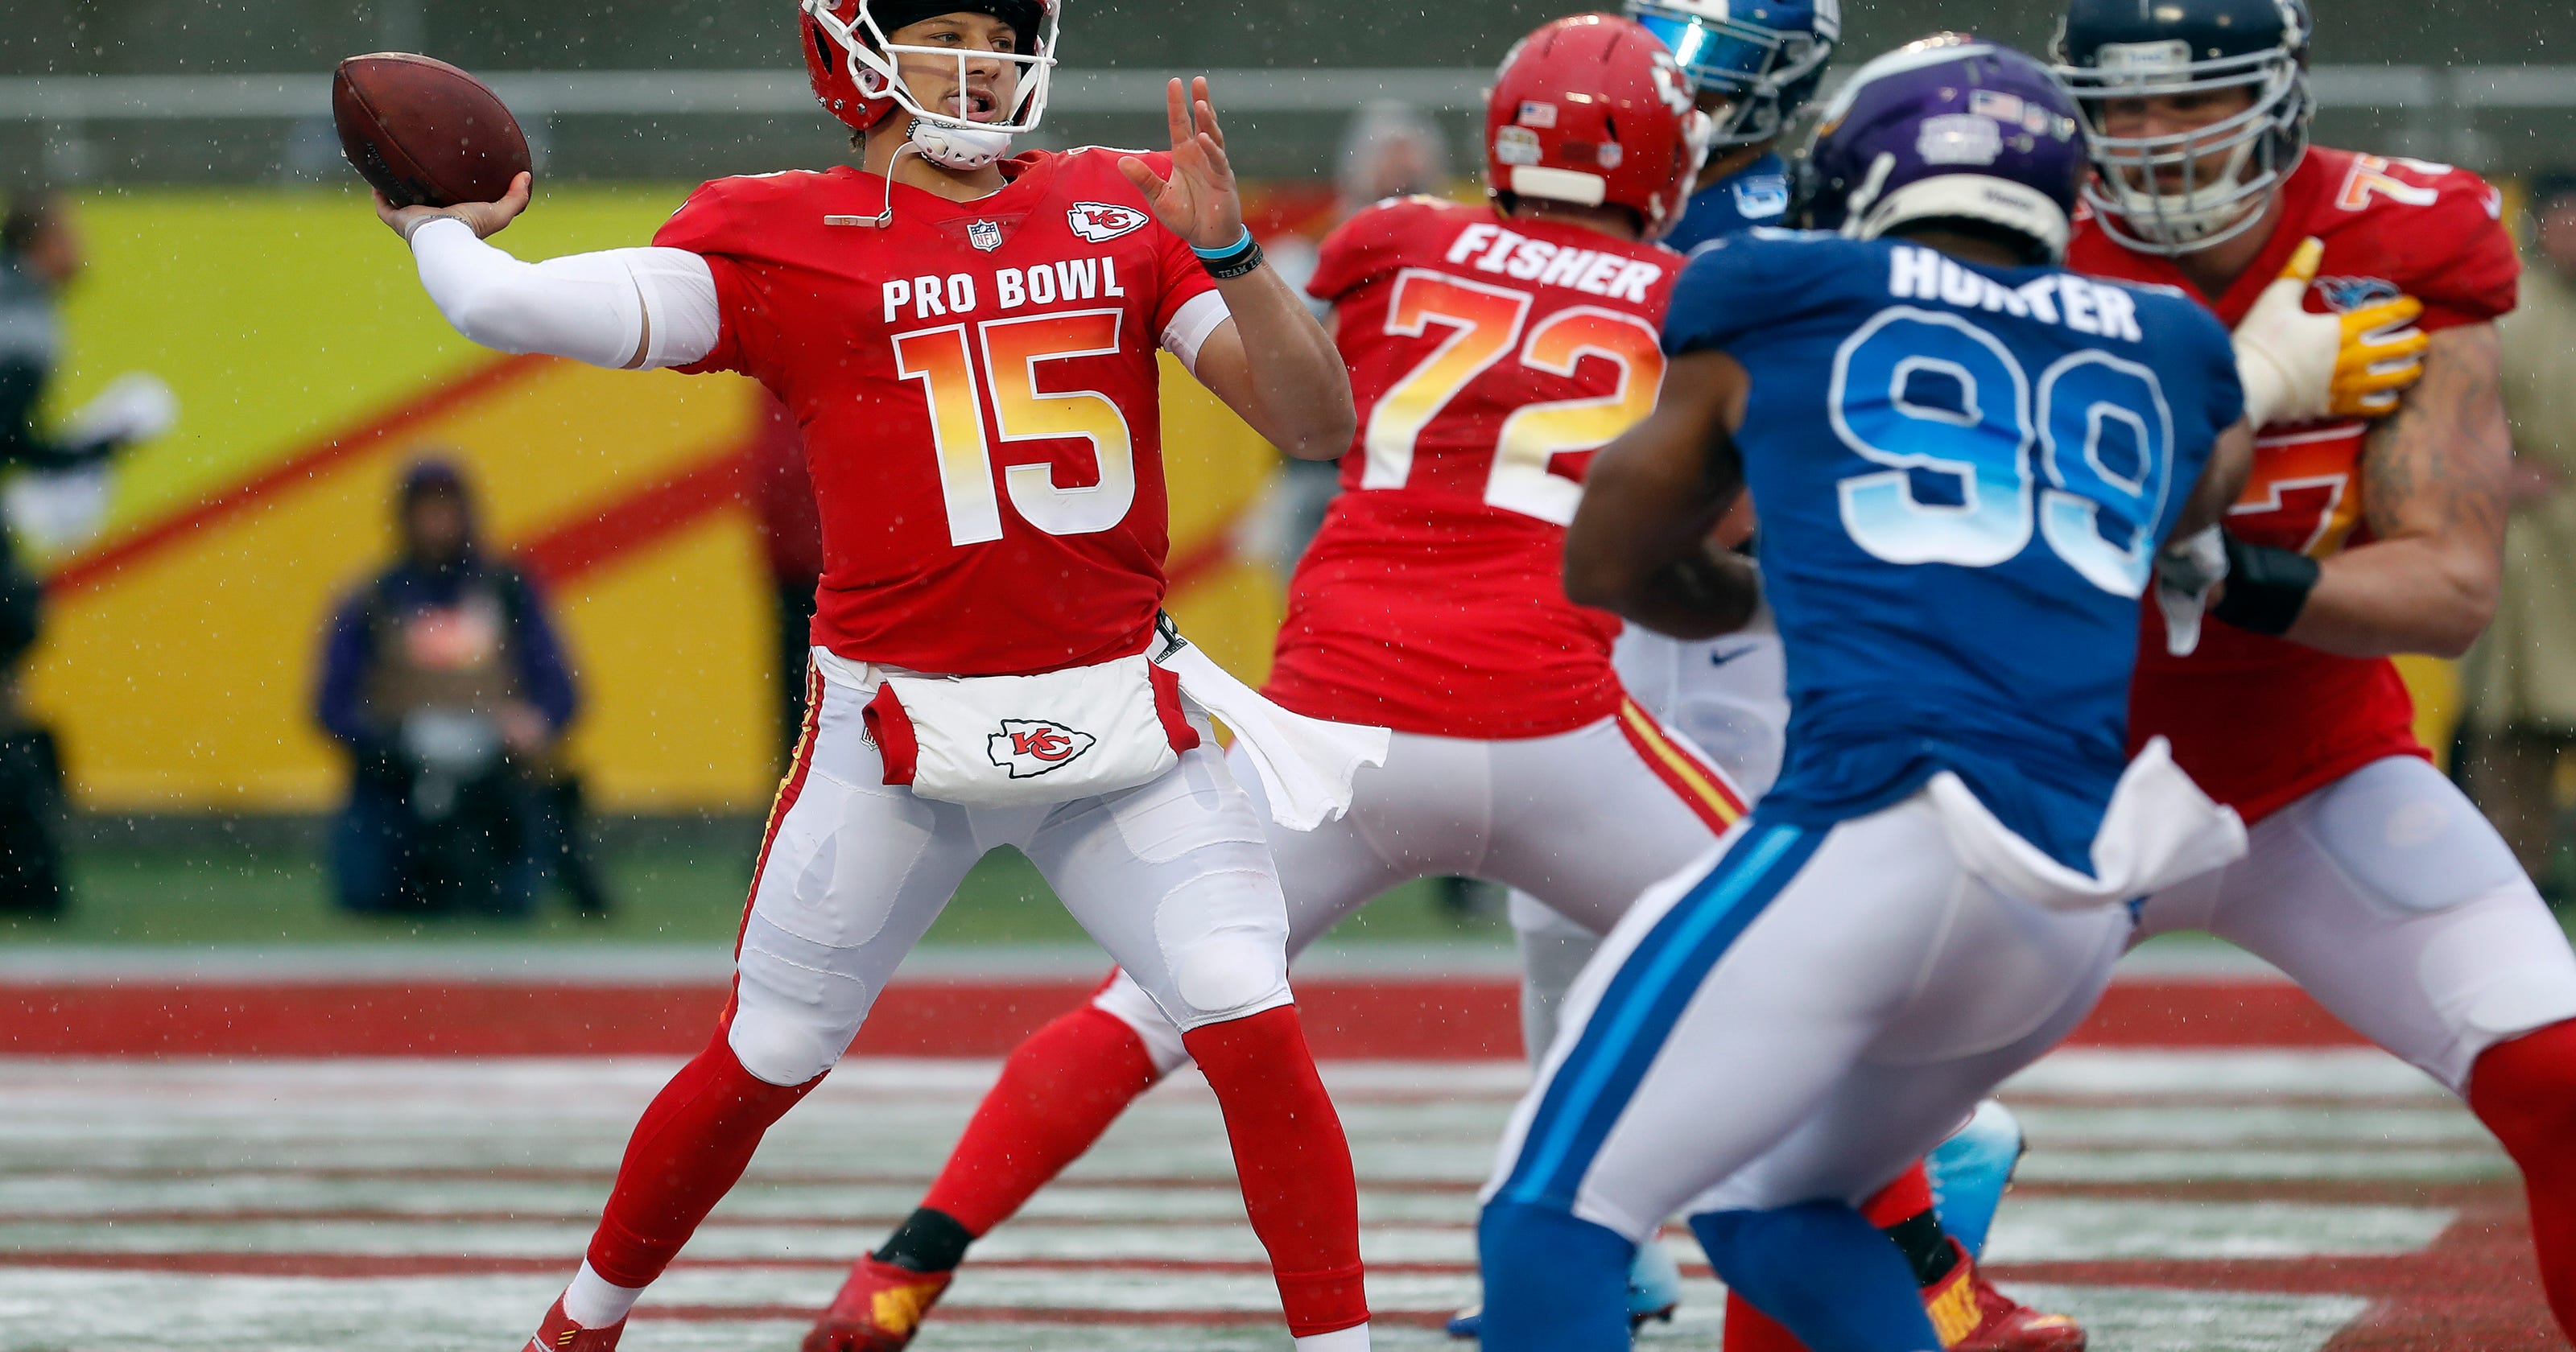 AFC wins 3rd straight Pro Bowl, 267 over NFC in Orlando